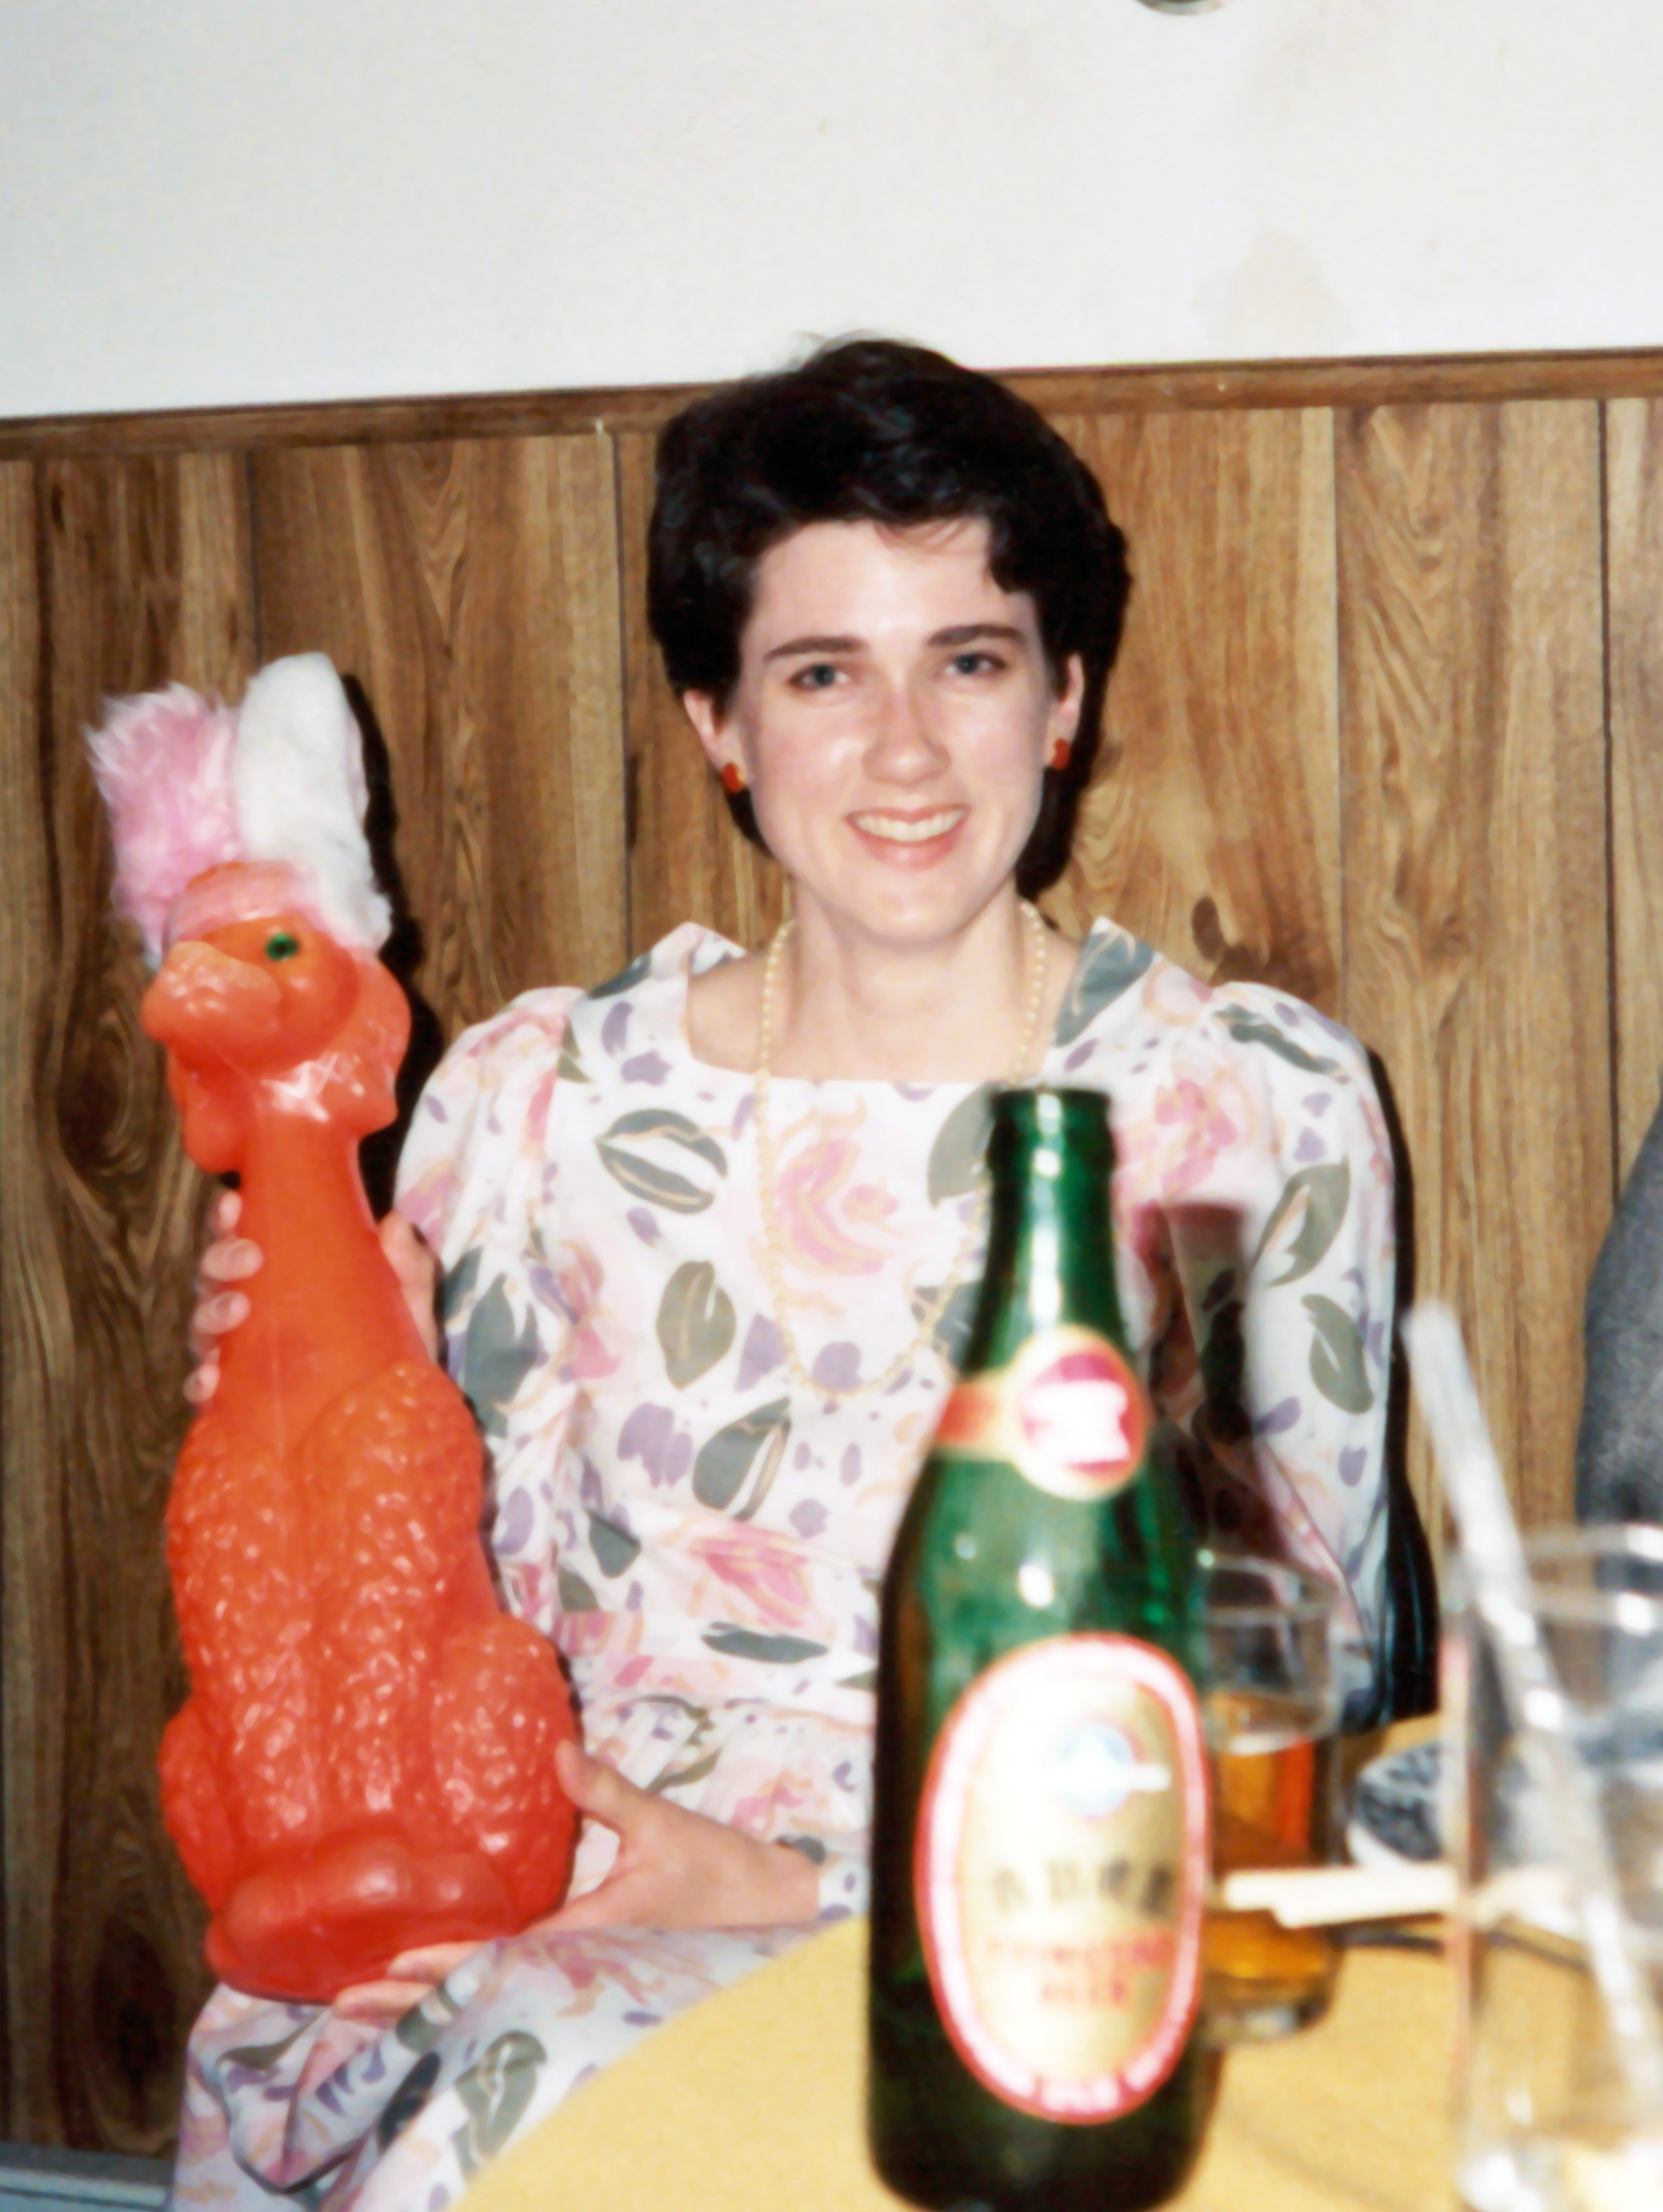 Image: Photo of me at age 28, white woman with short dark hair wearing a flowered dress, holding an orange plastic poodle with pink fuzzy rabbit ears. I'm sitting at a table with a bottle of beer in the foreground.